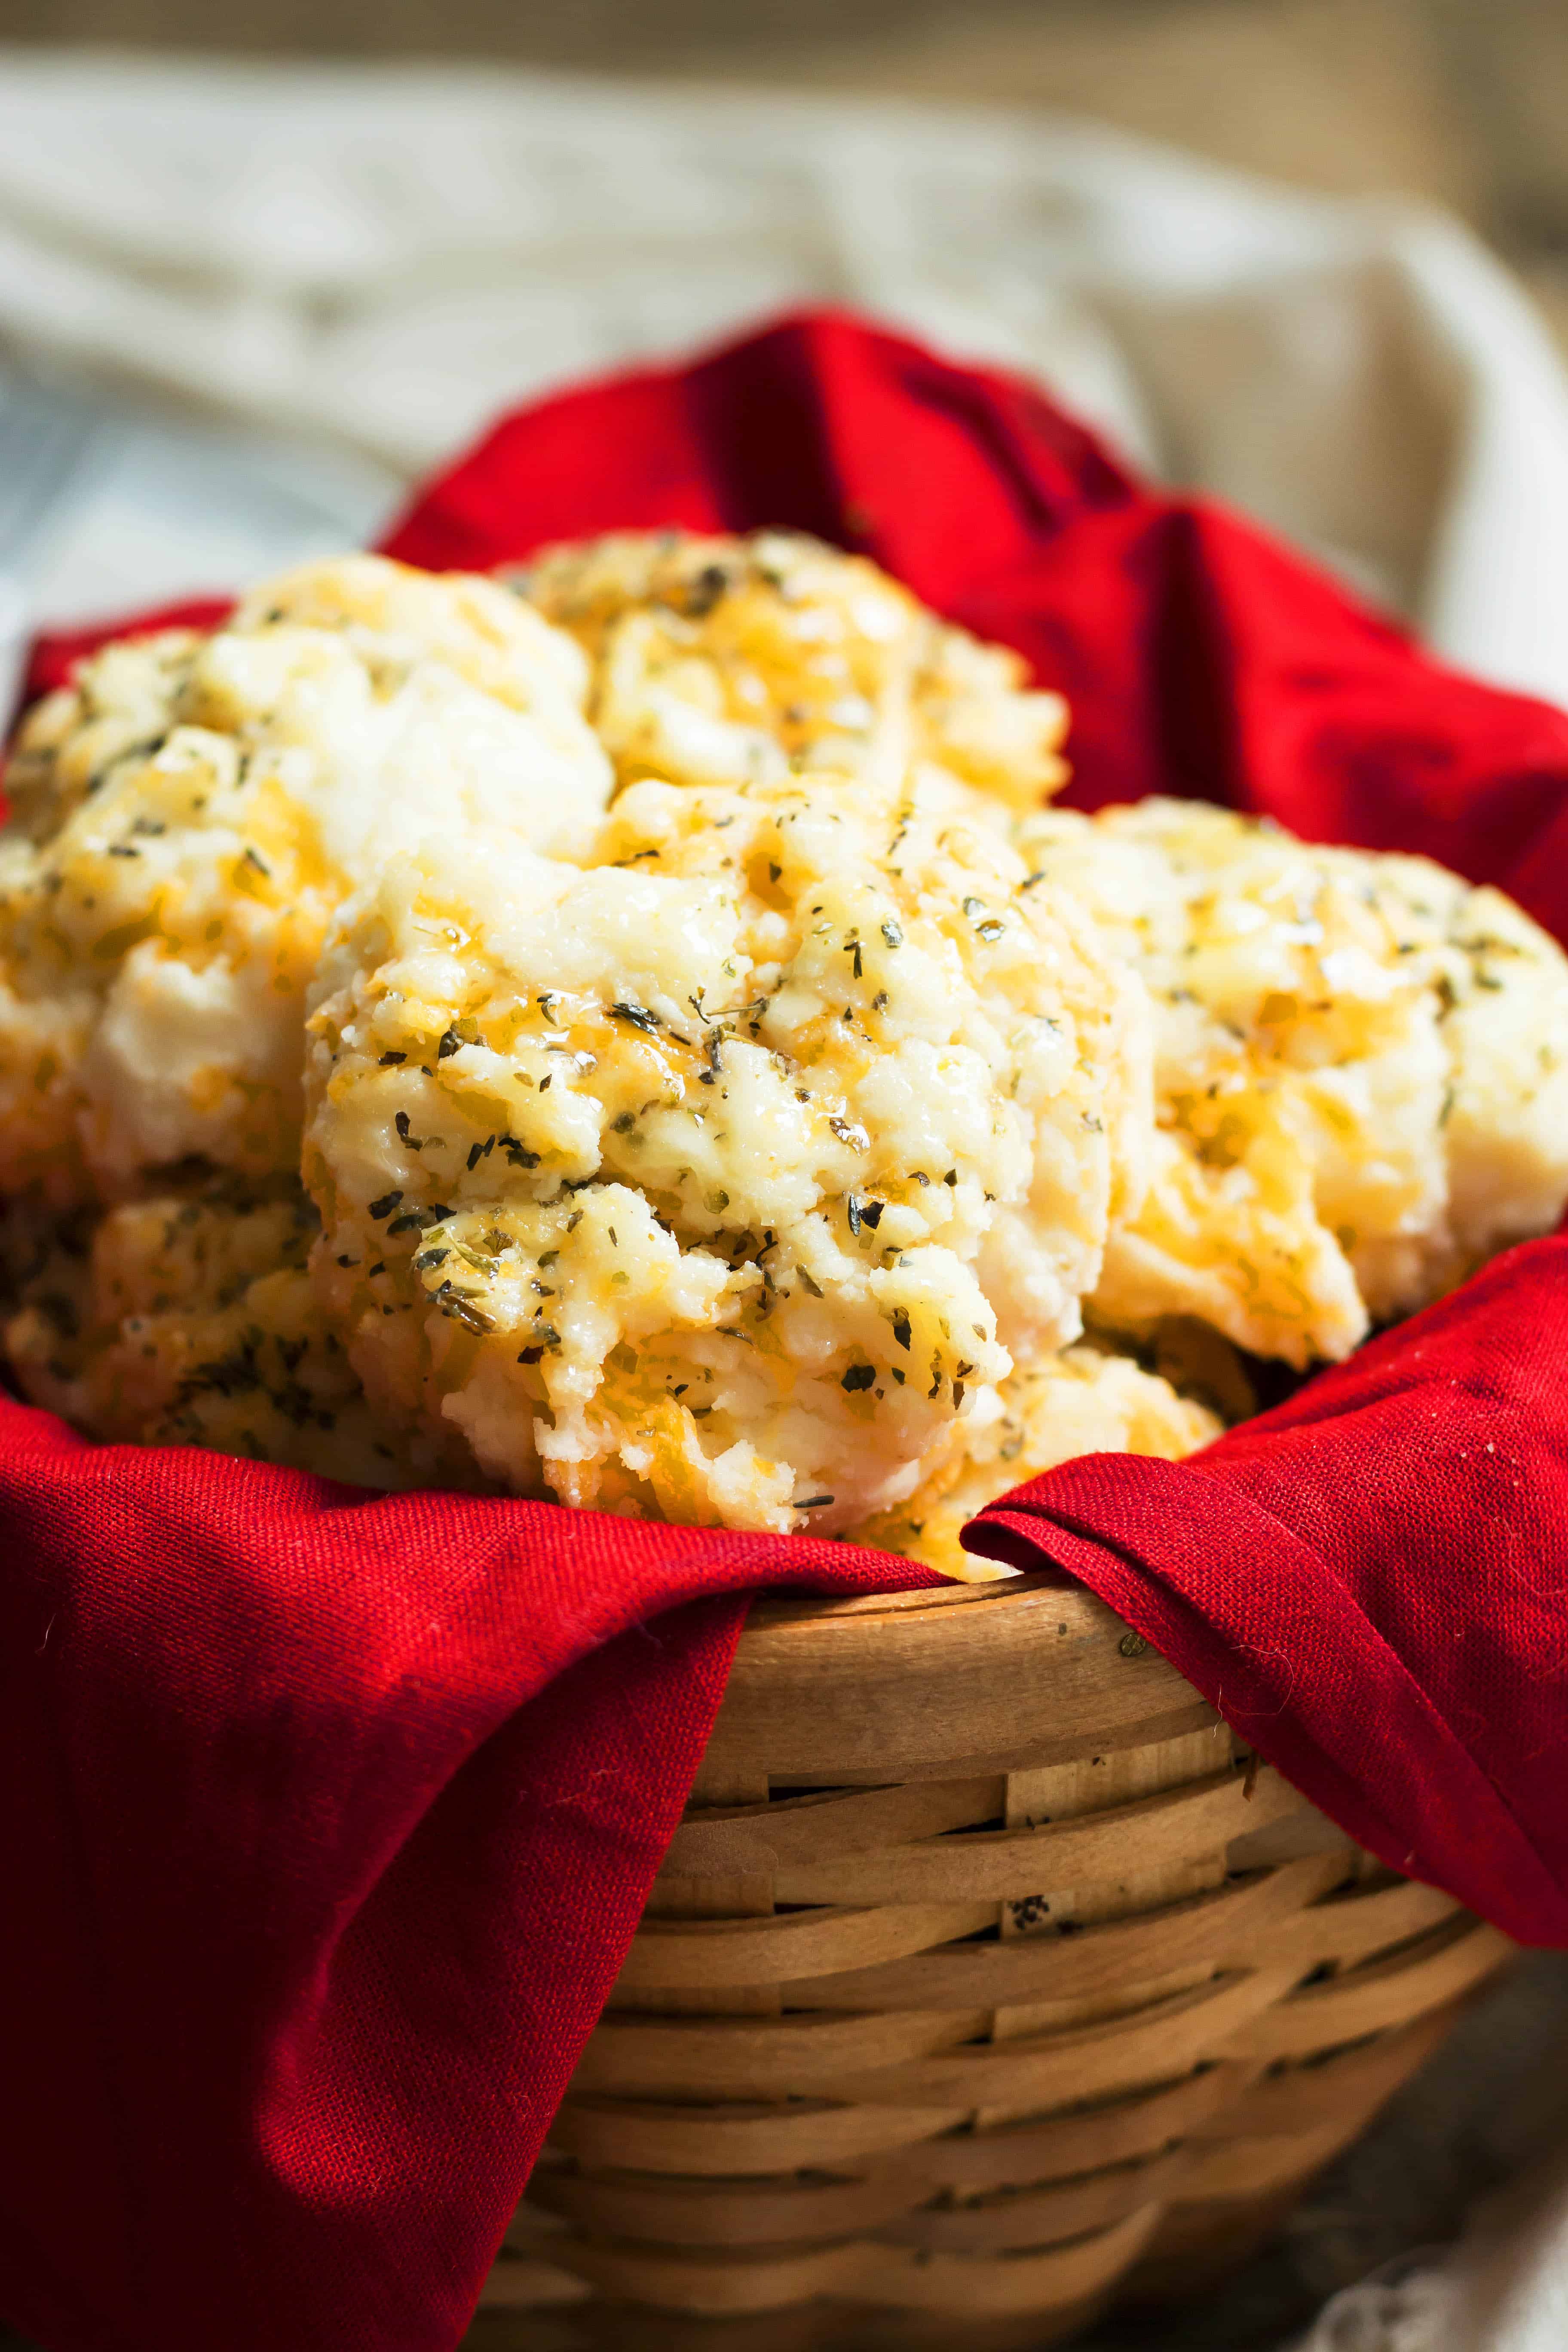 A basket lined with a red napkin and filled with gluten-free Copycat Red Lobster biscuits.